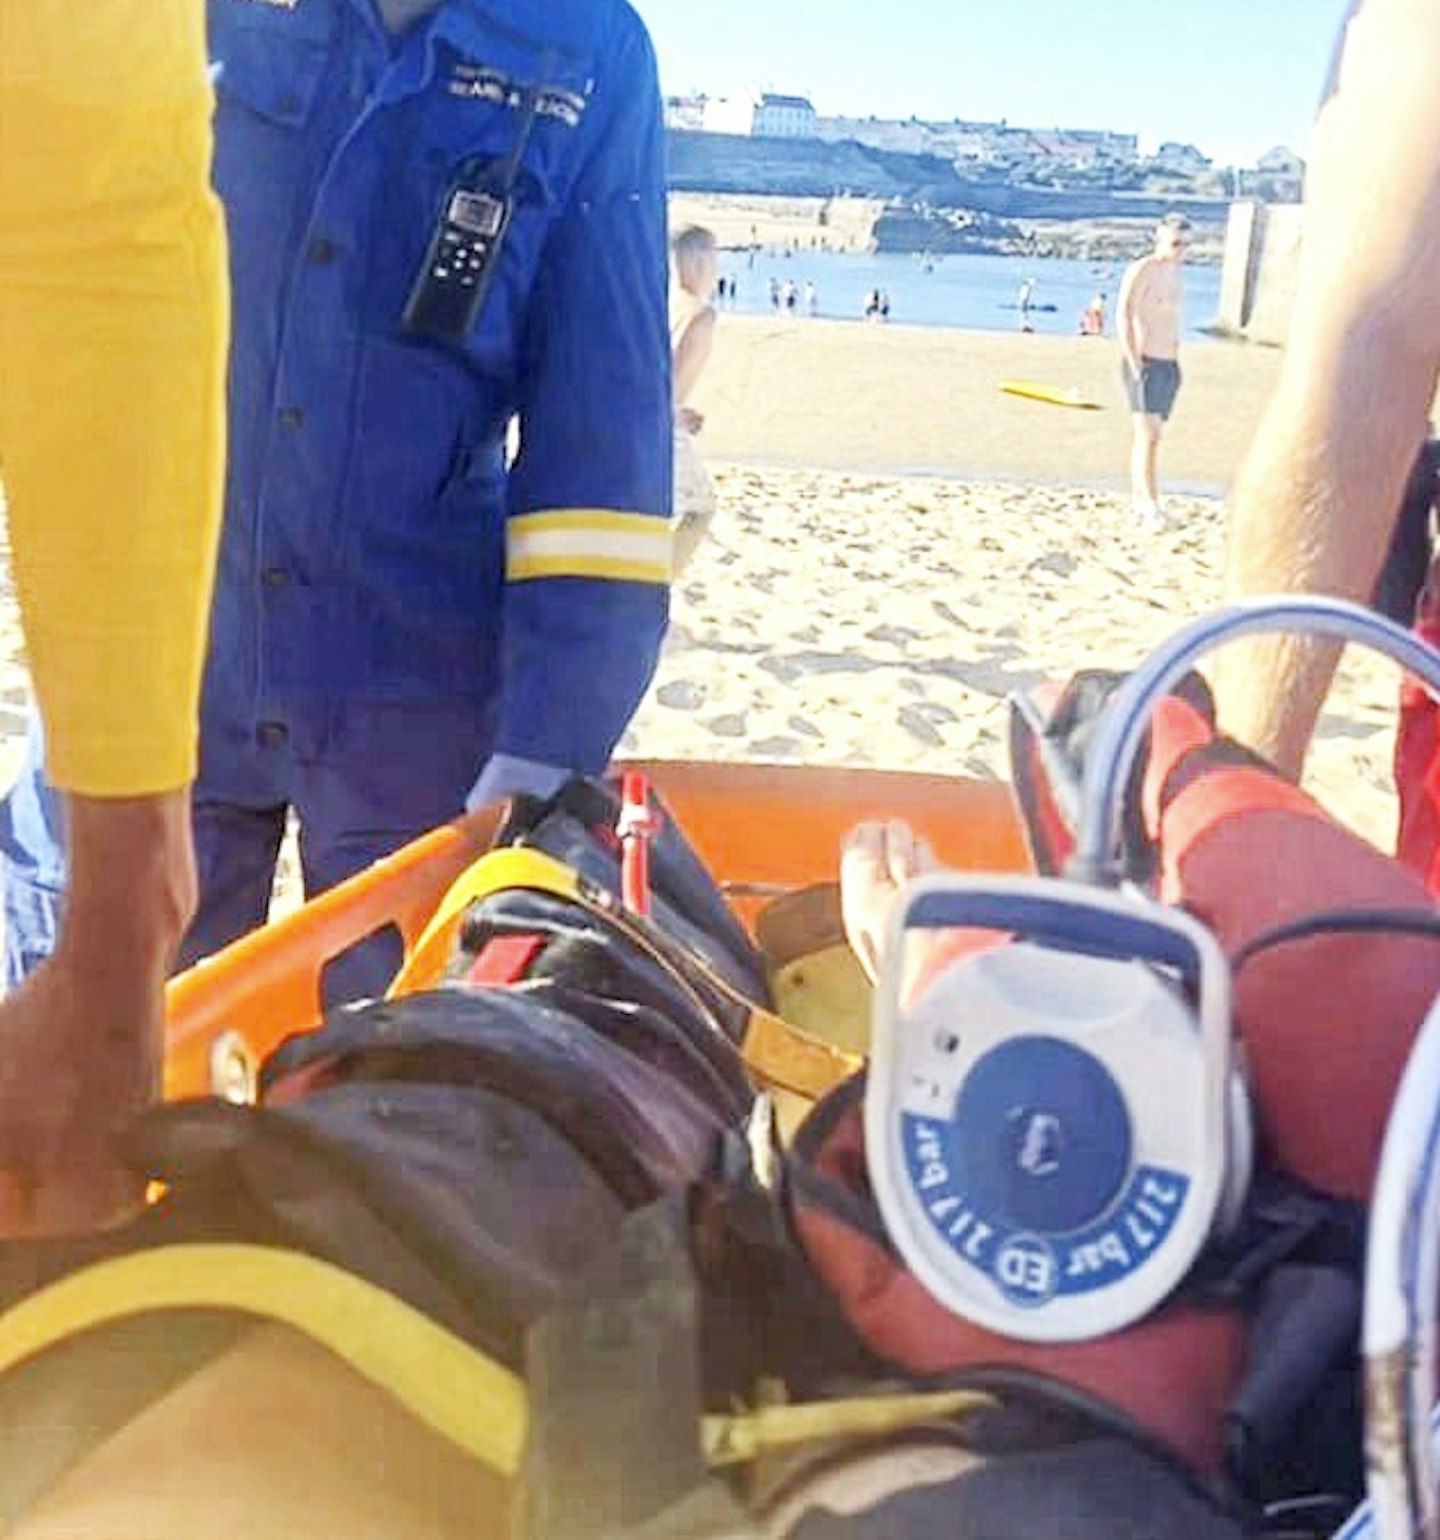 leg snapped in half after jumping off pier